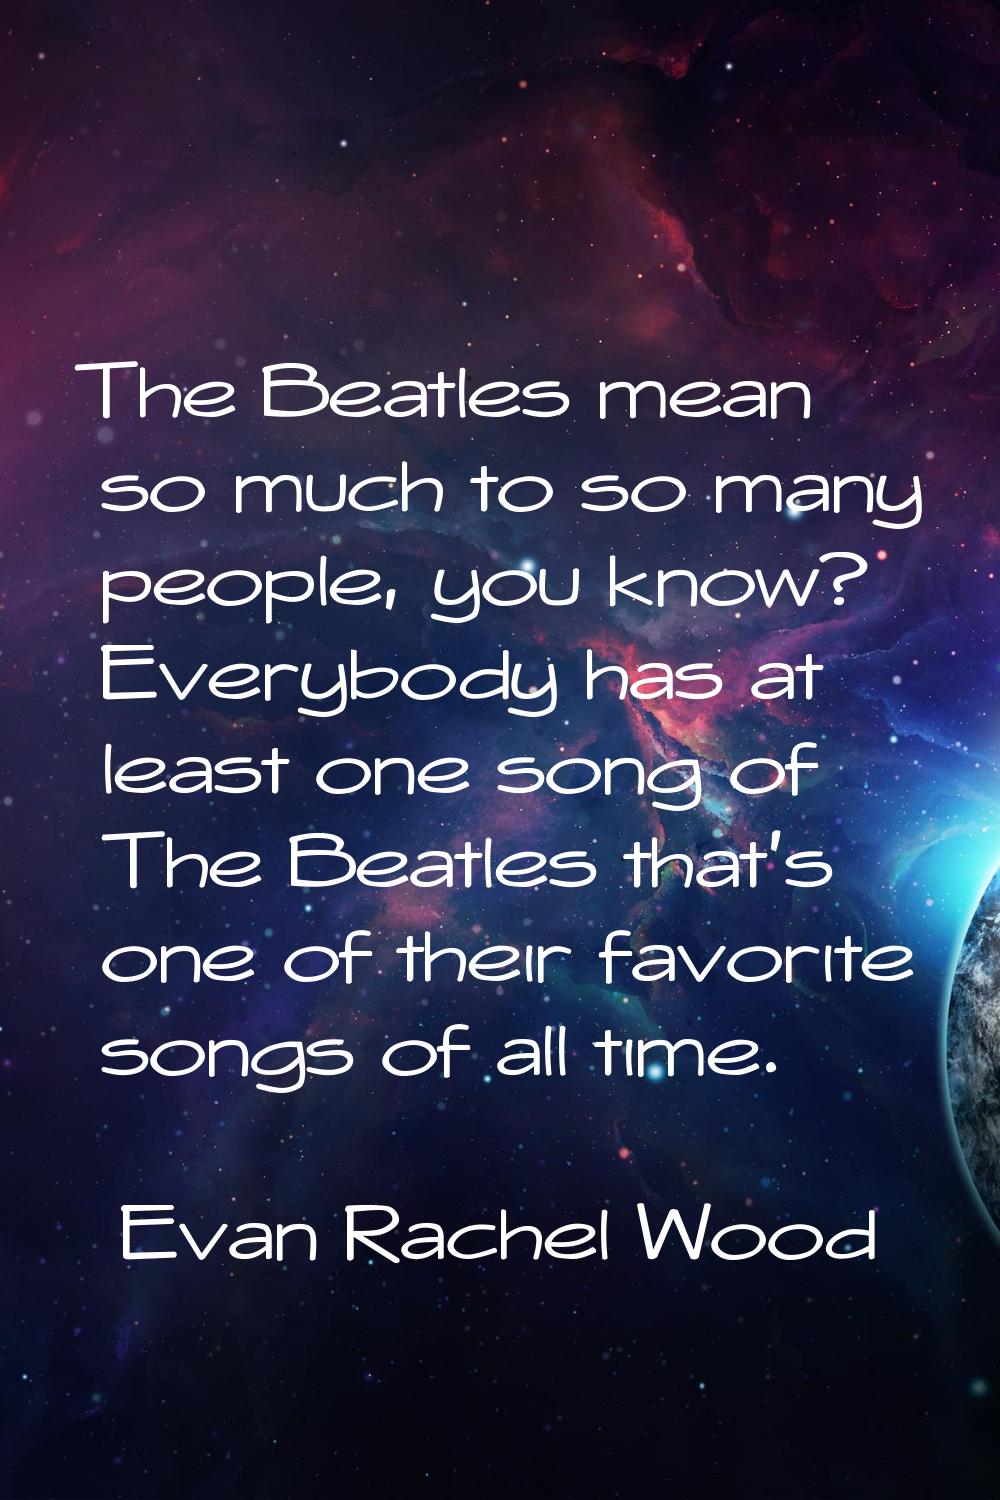 The Beatles mean so much to so many people, you know? Everybody has at least one song of The Beatle